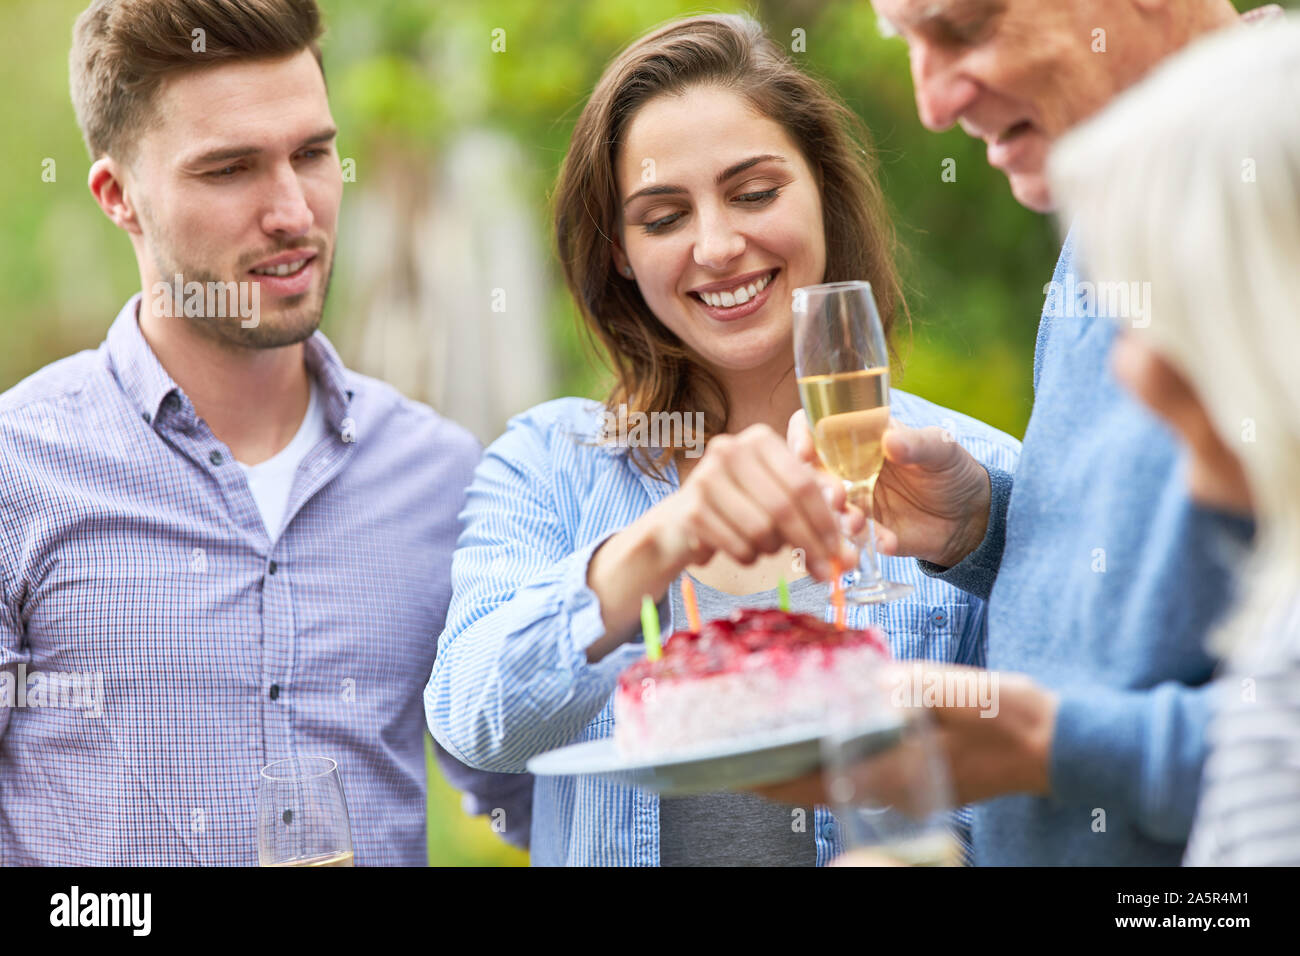 Woman decorates birthday cake with candles on a family celebration in the garden Stock Photo